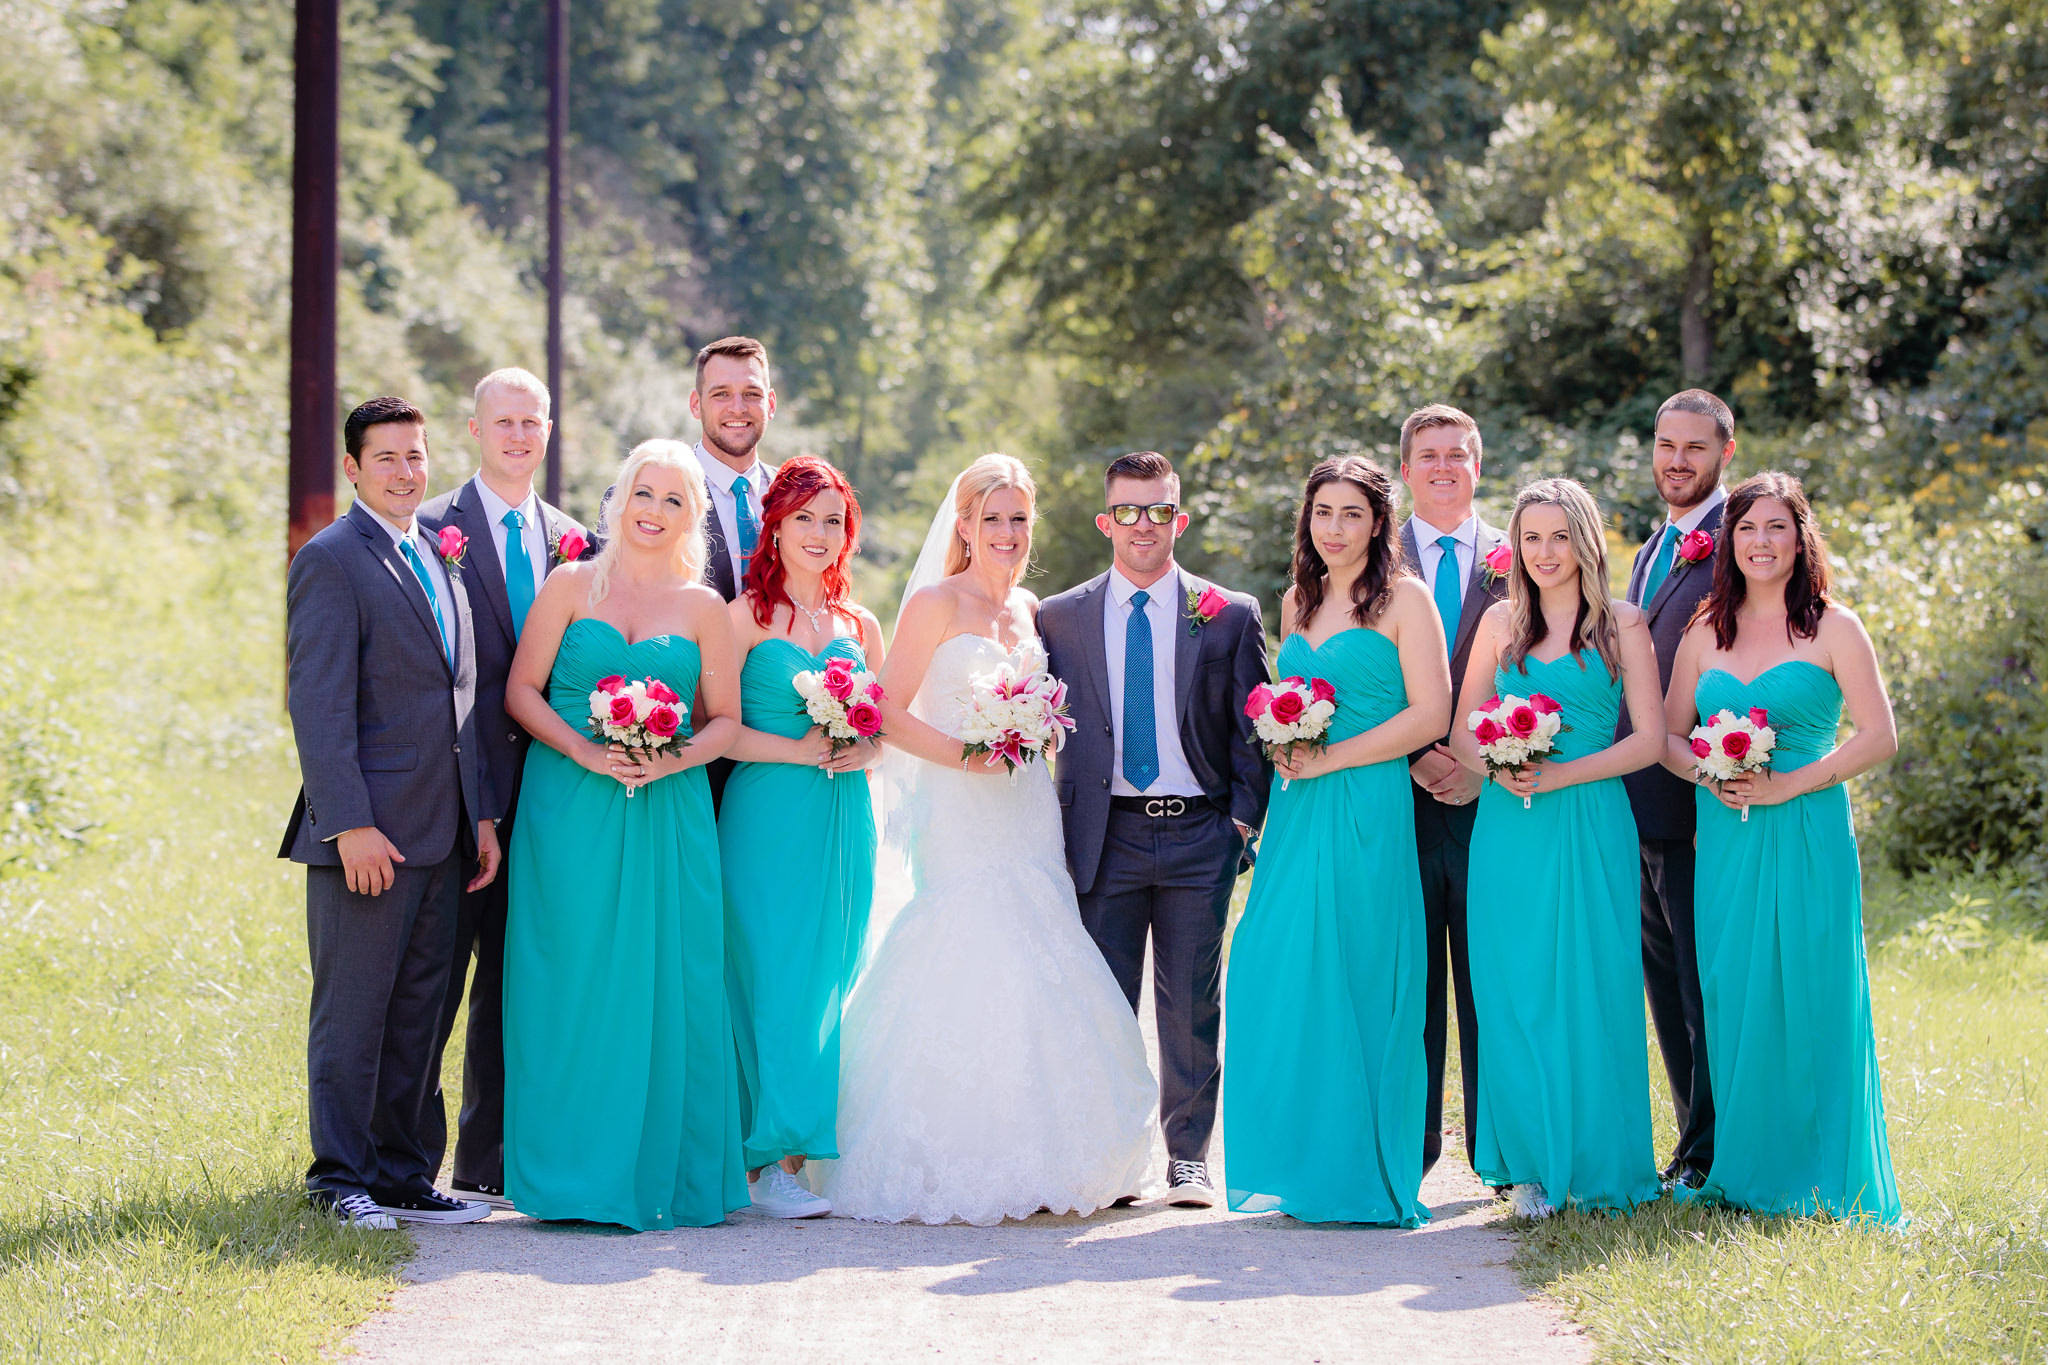 Bridal party in grey suits and turquoise dresses on a bike trail